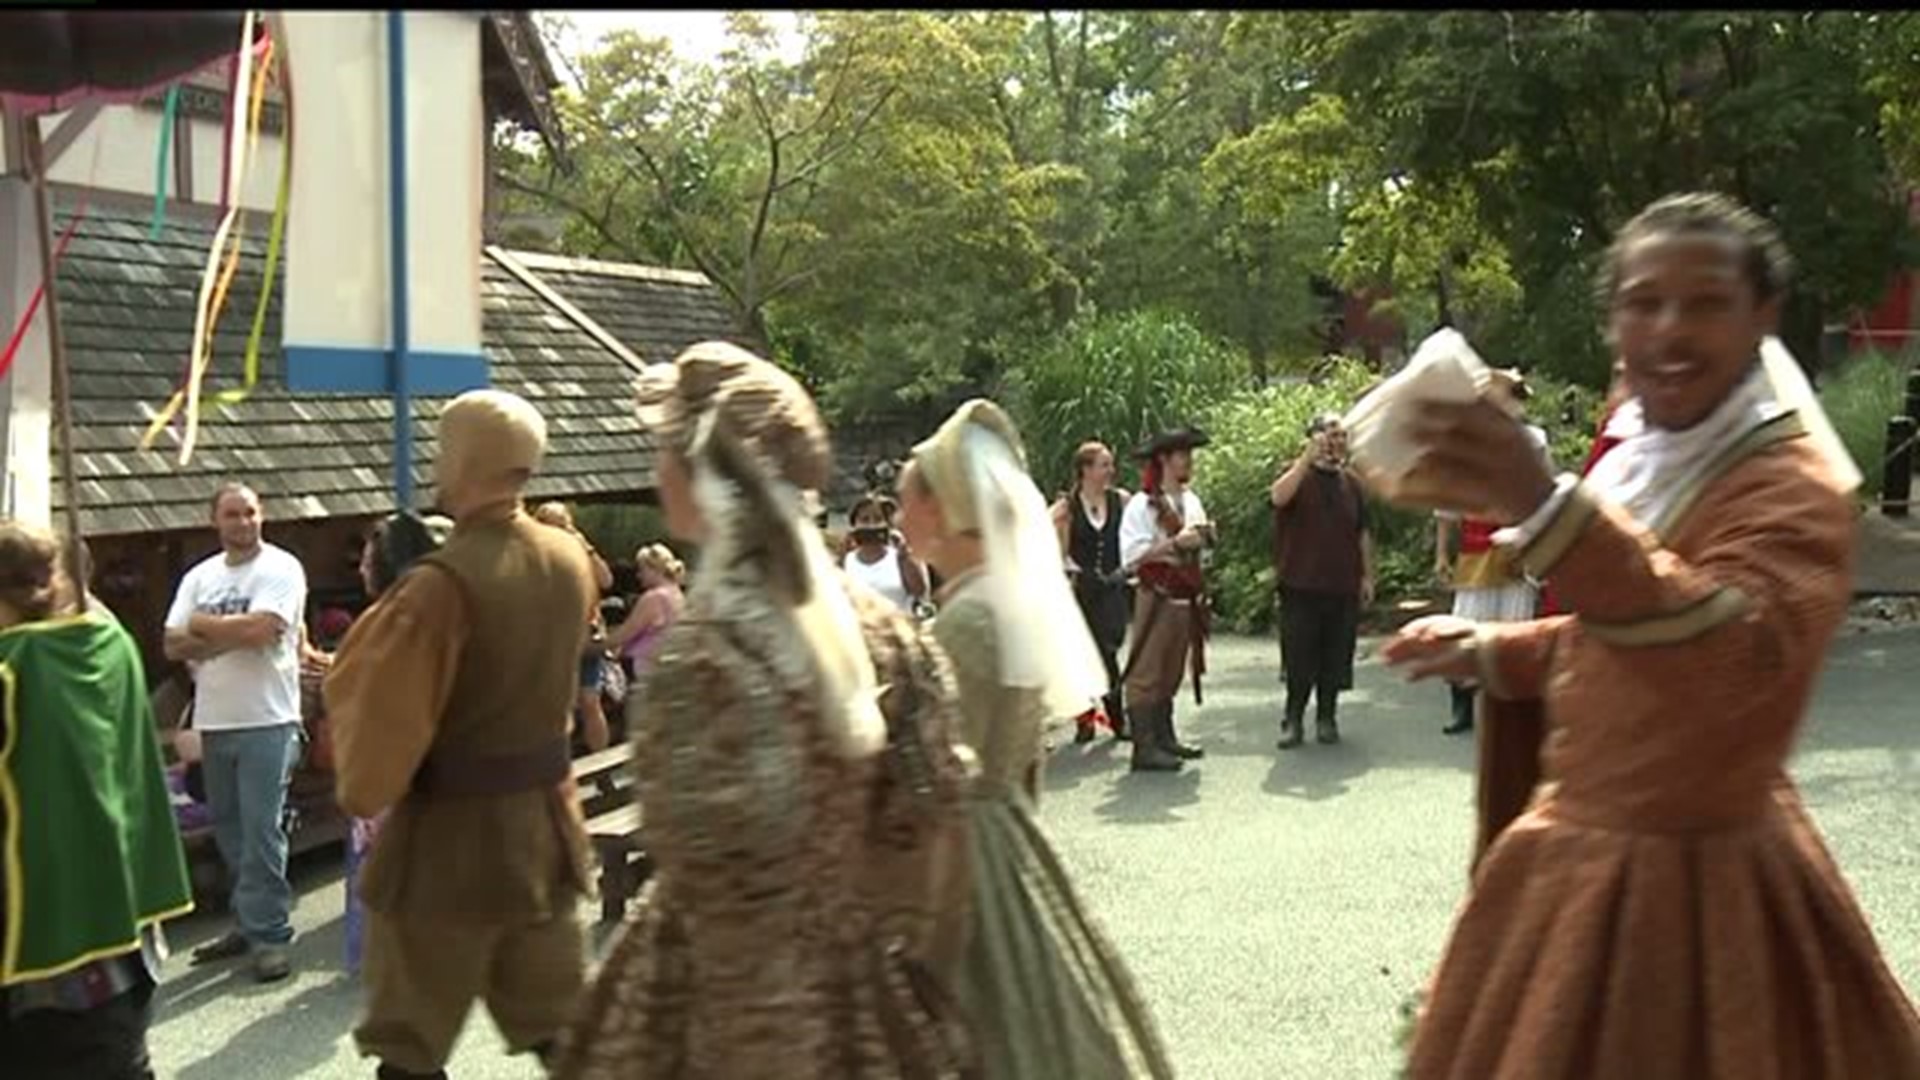 Visitors of Pennsylvania Renaissance Faire finds ways to stay cool